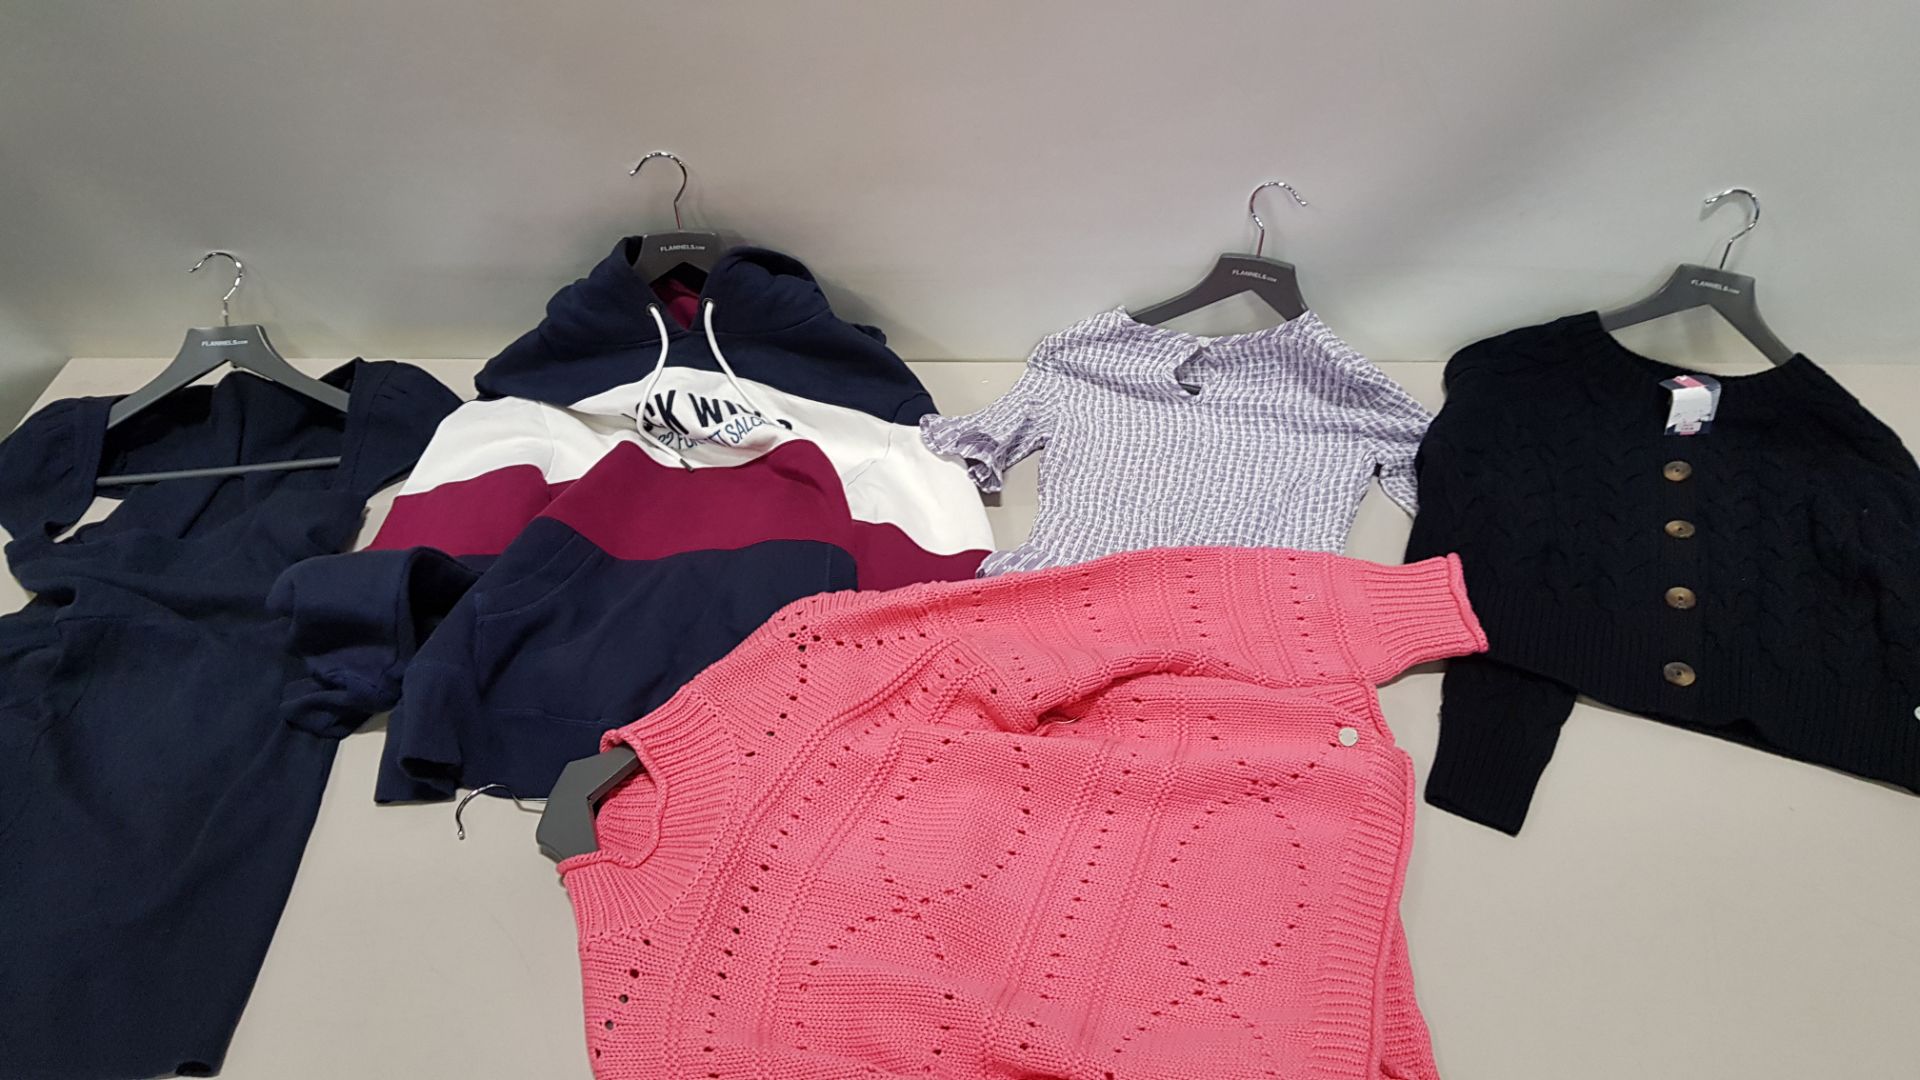 11 PIECE MIXED JACK WILLS CLOTHING LOT IN VARIOUS SIZES CONTAINING KNITTED JUMPERS IN VARIOUS